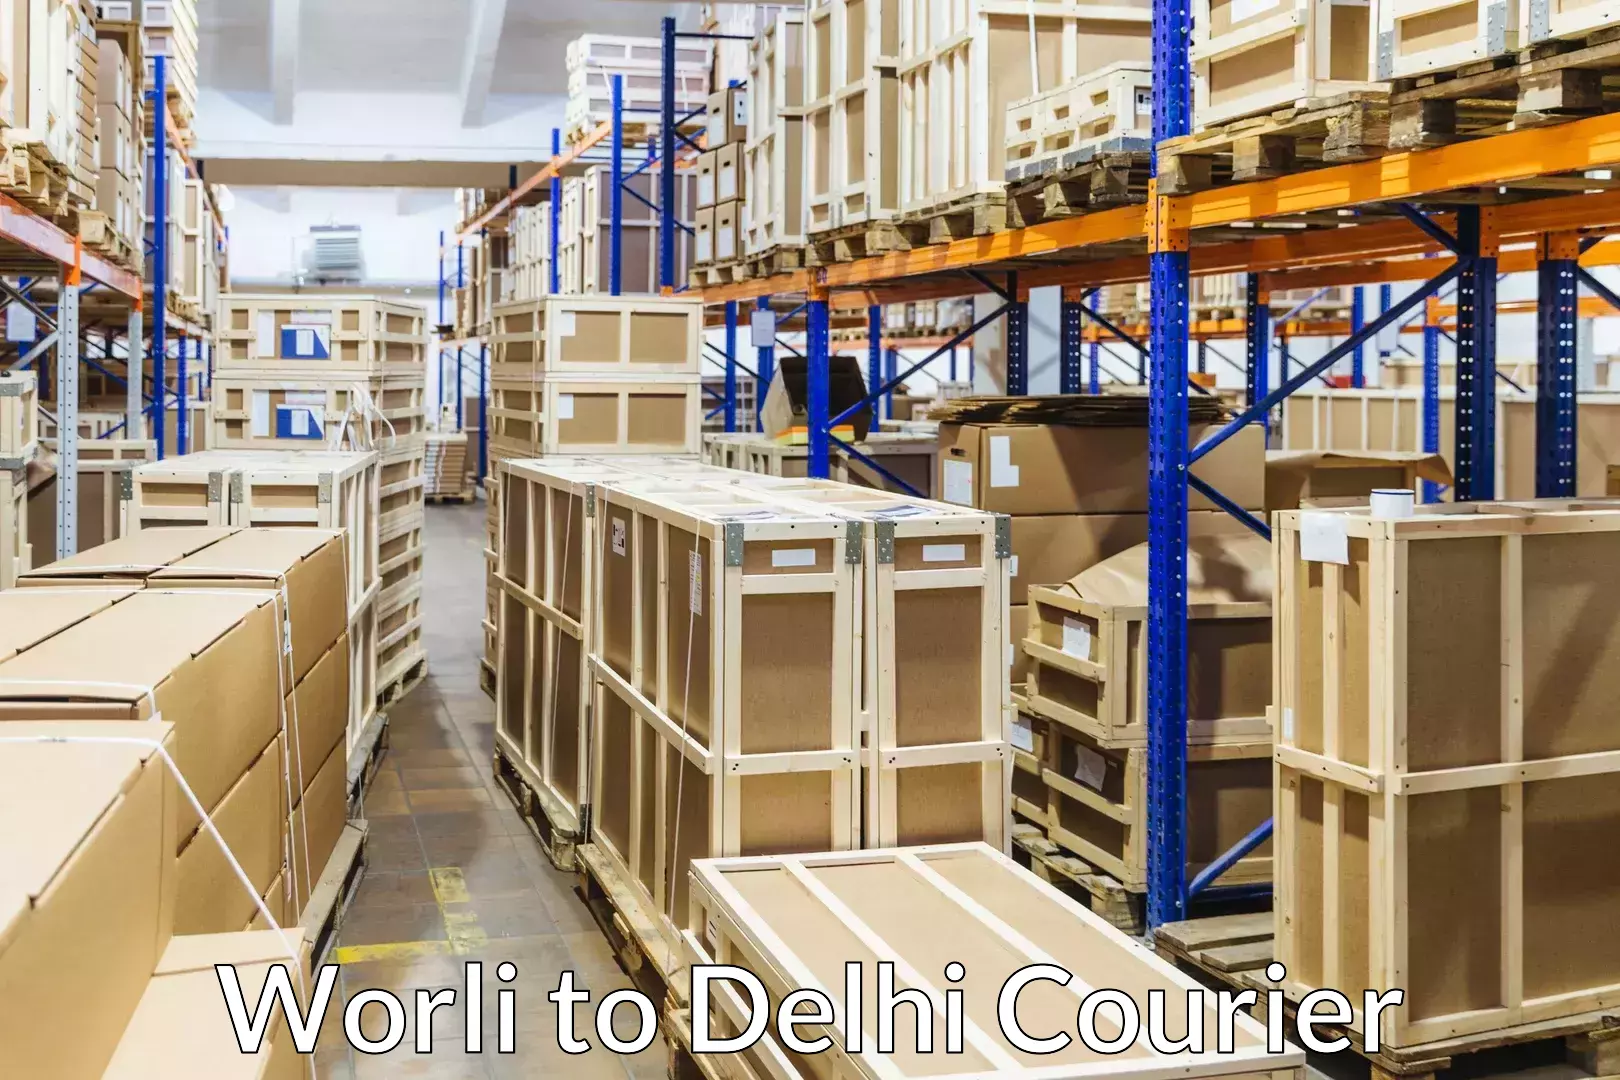 Furniture delivery service Worli to NCR